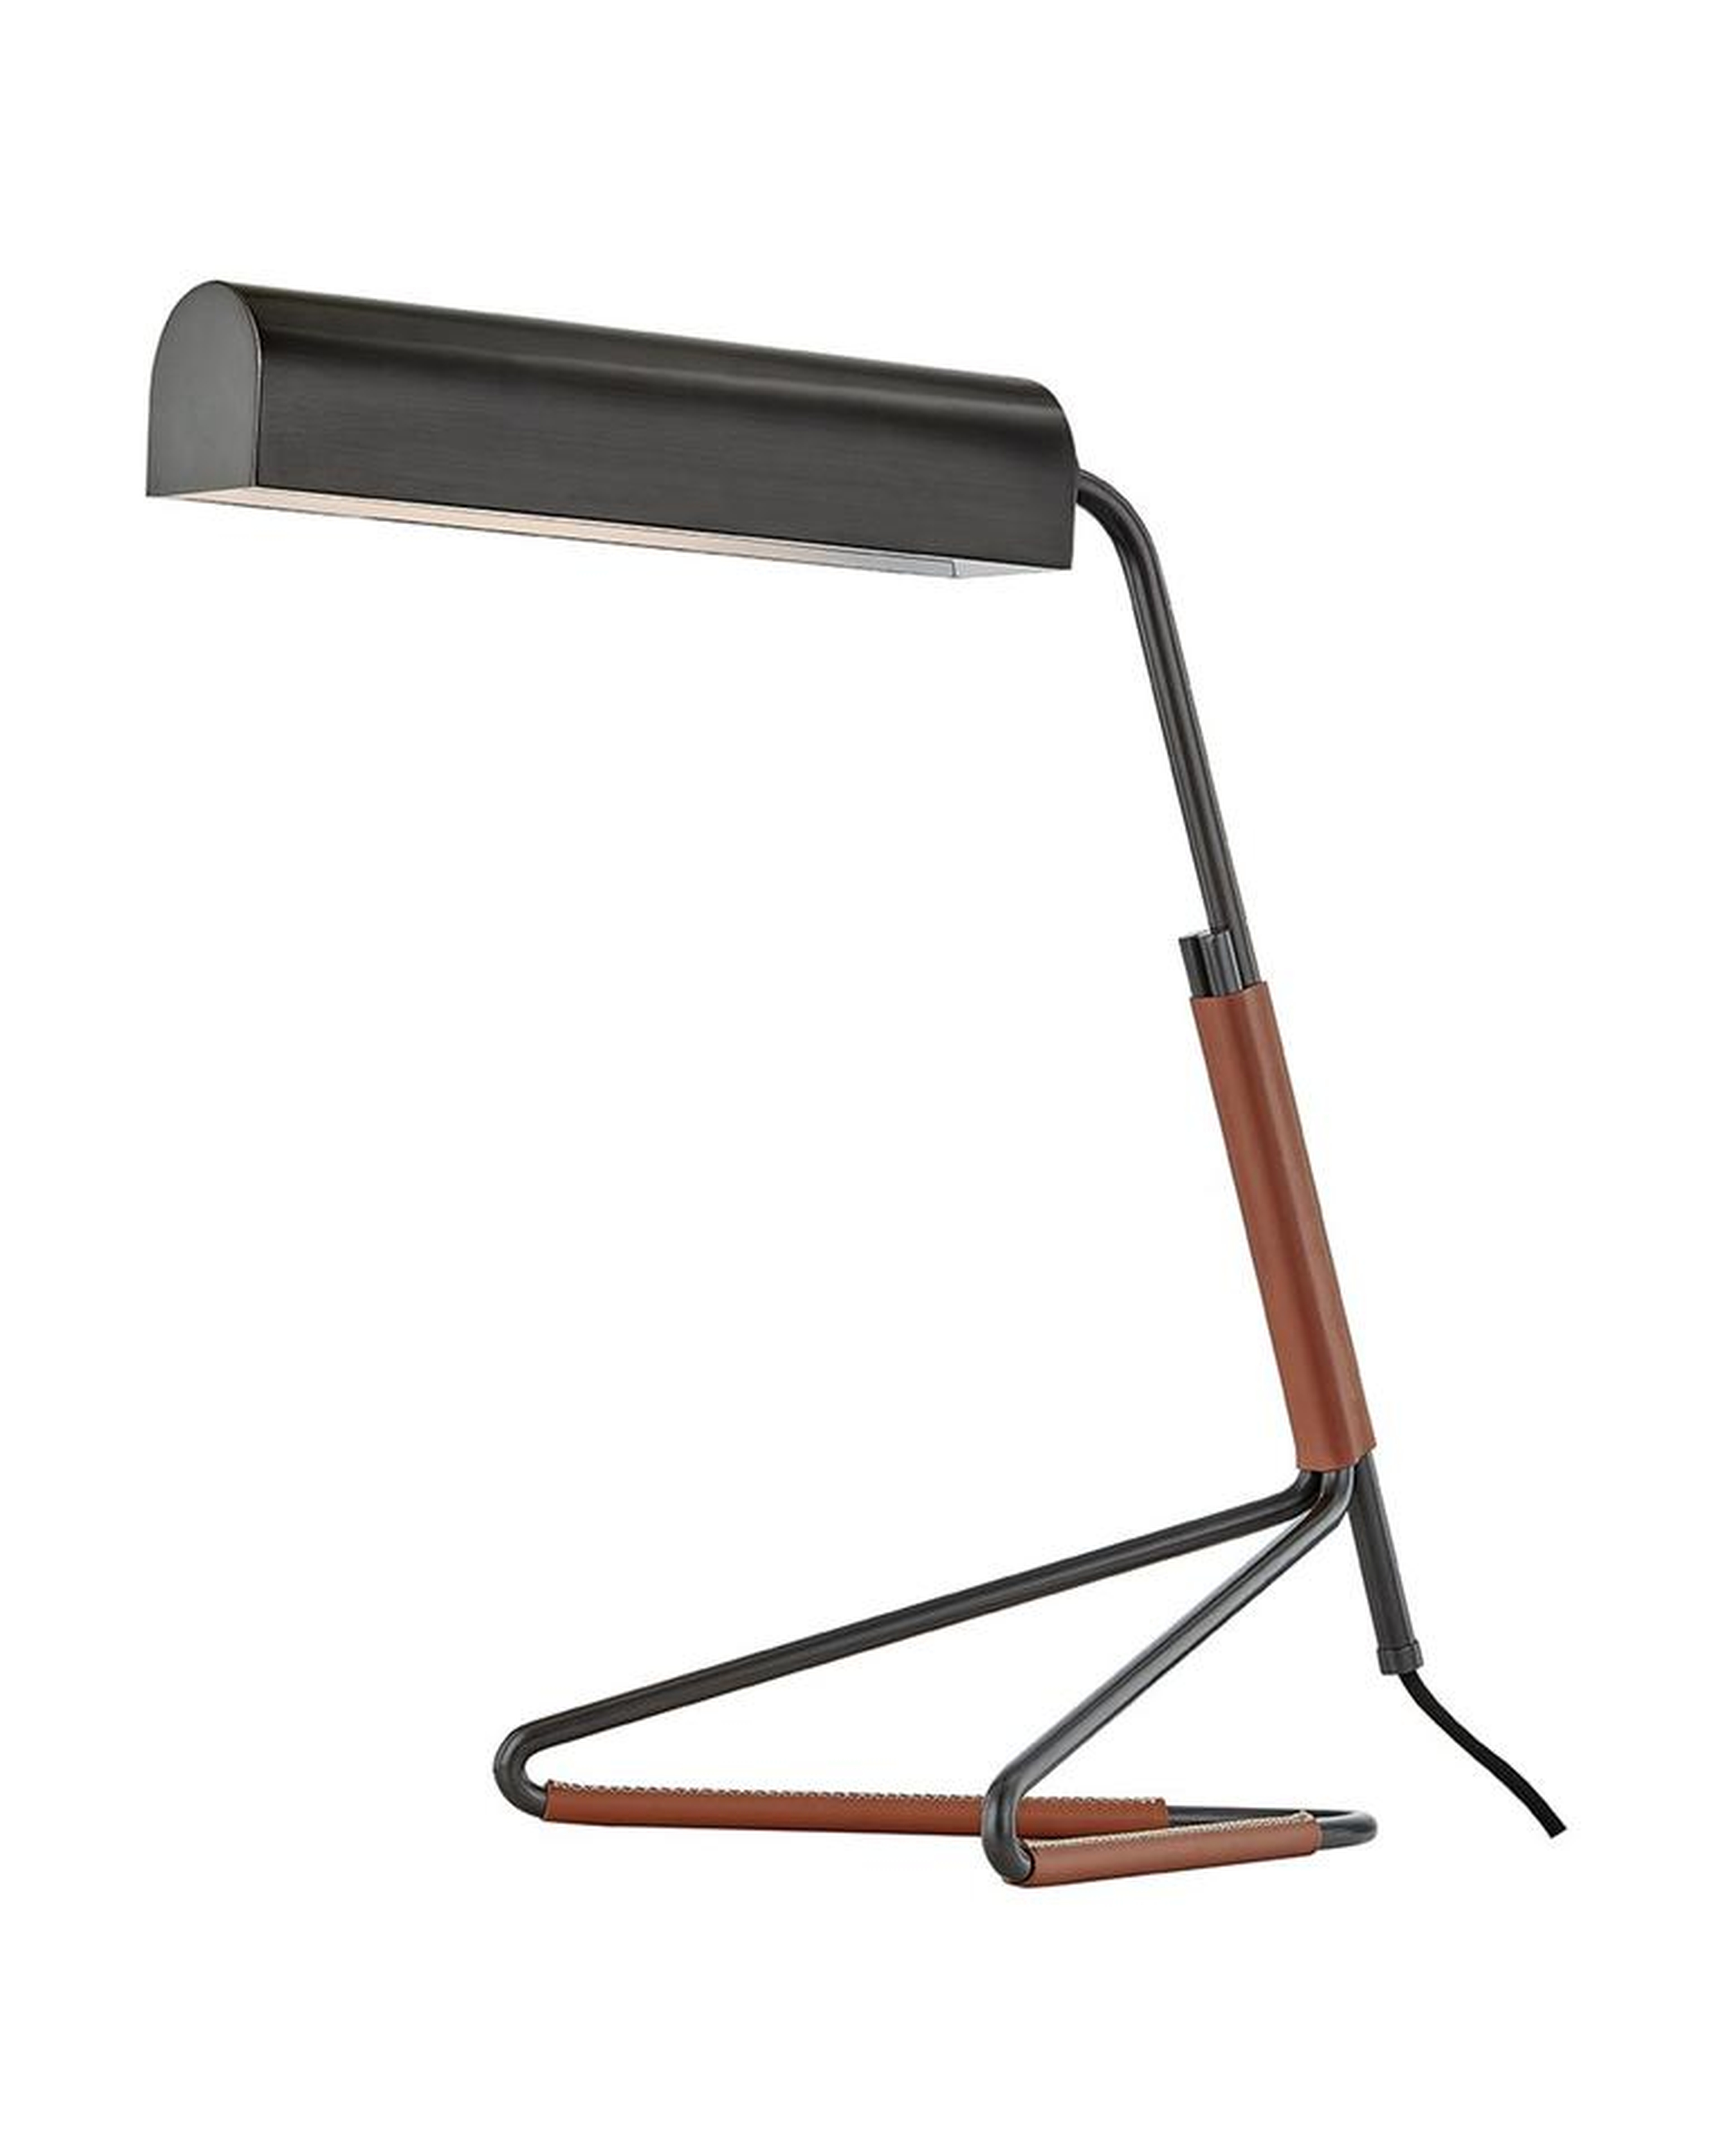 VANCE TABLE LAMP - McGee & Co.